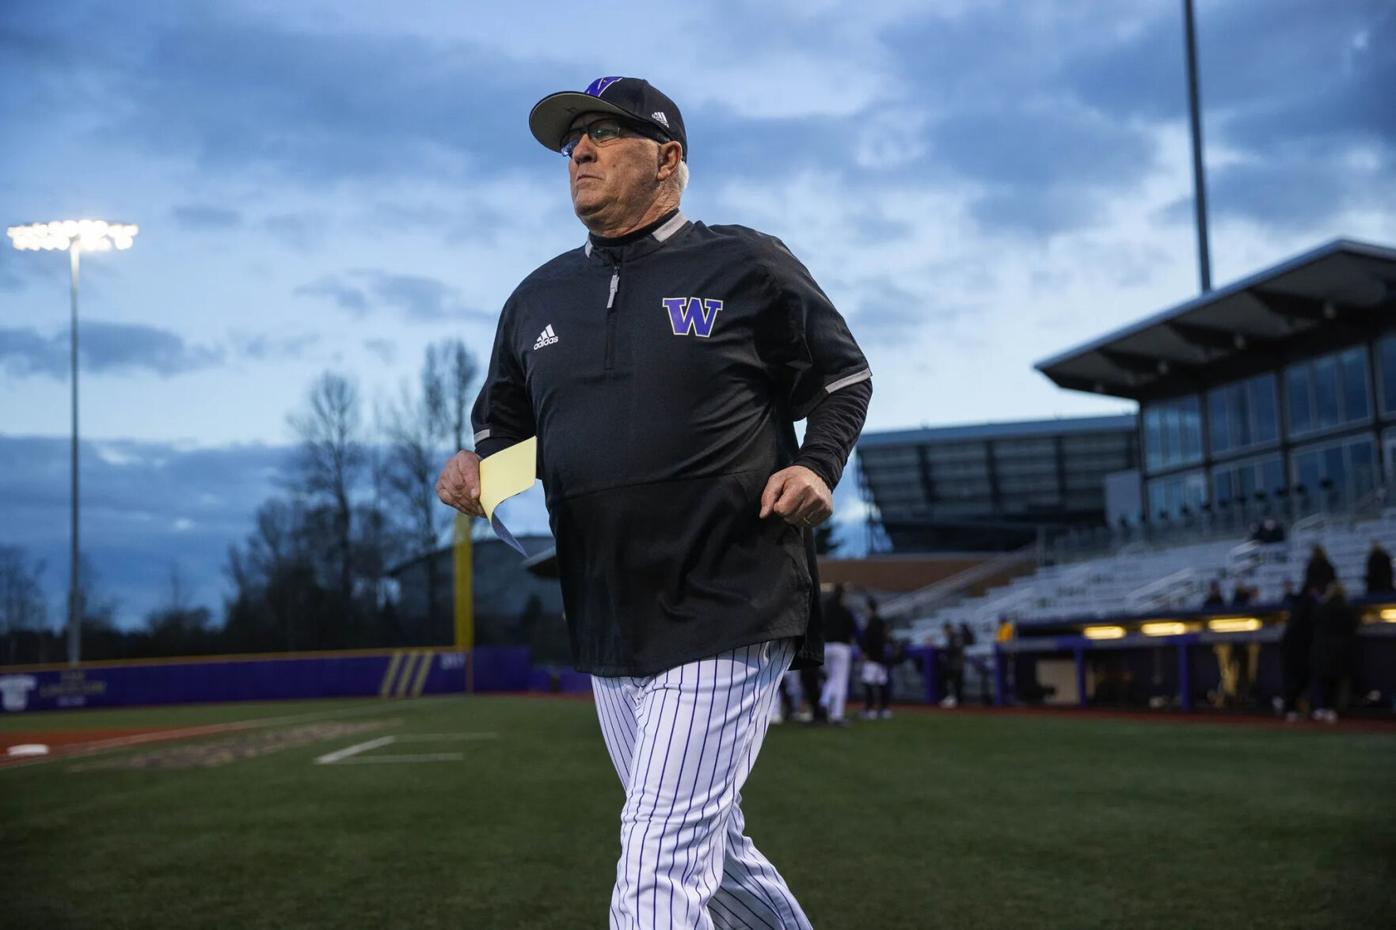 UW baseball ordered to vacate wins from 2018 CWS season